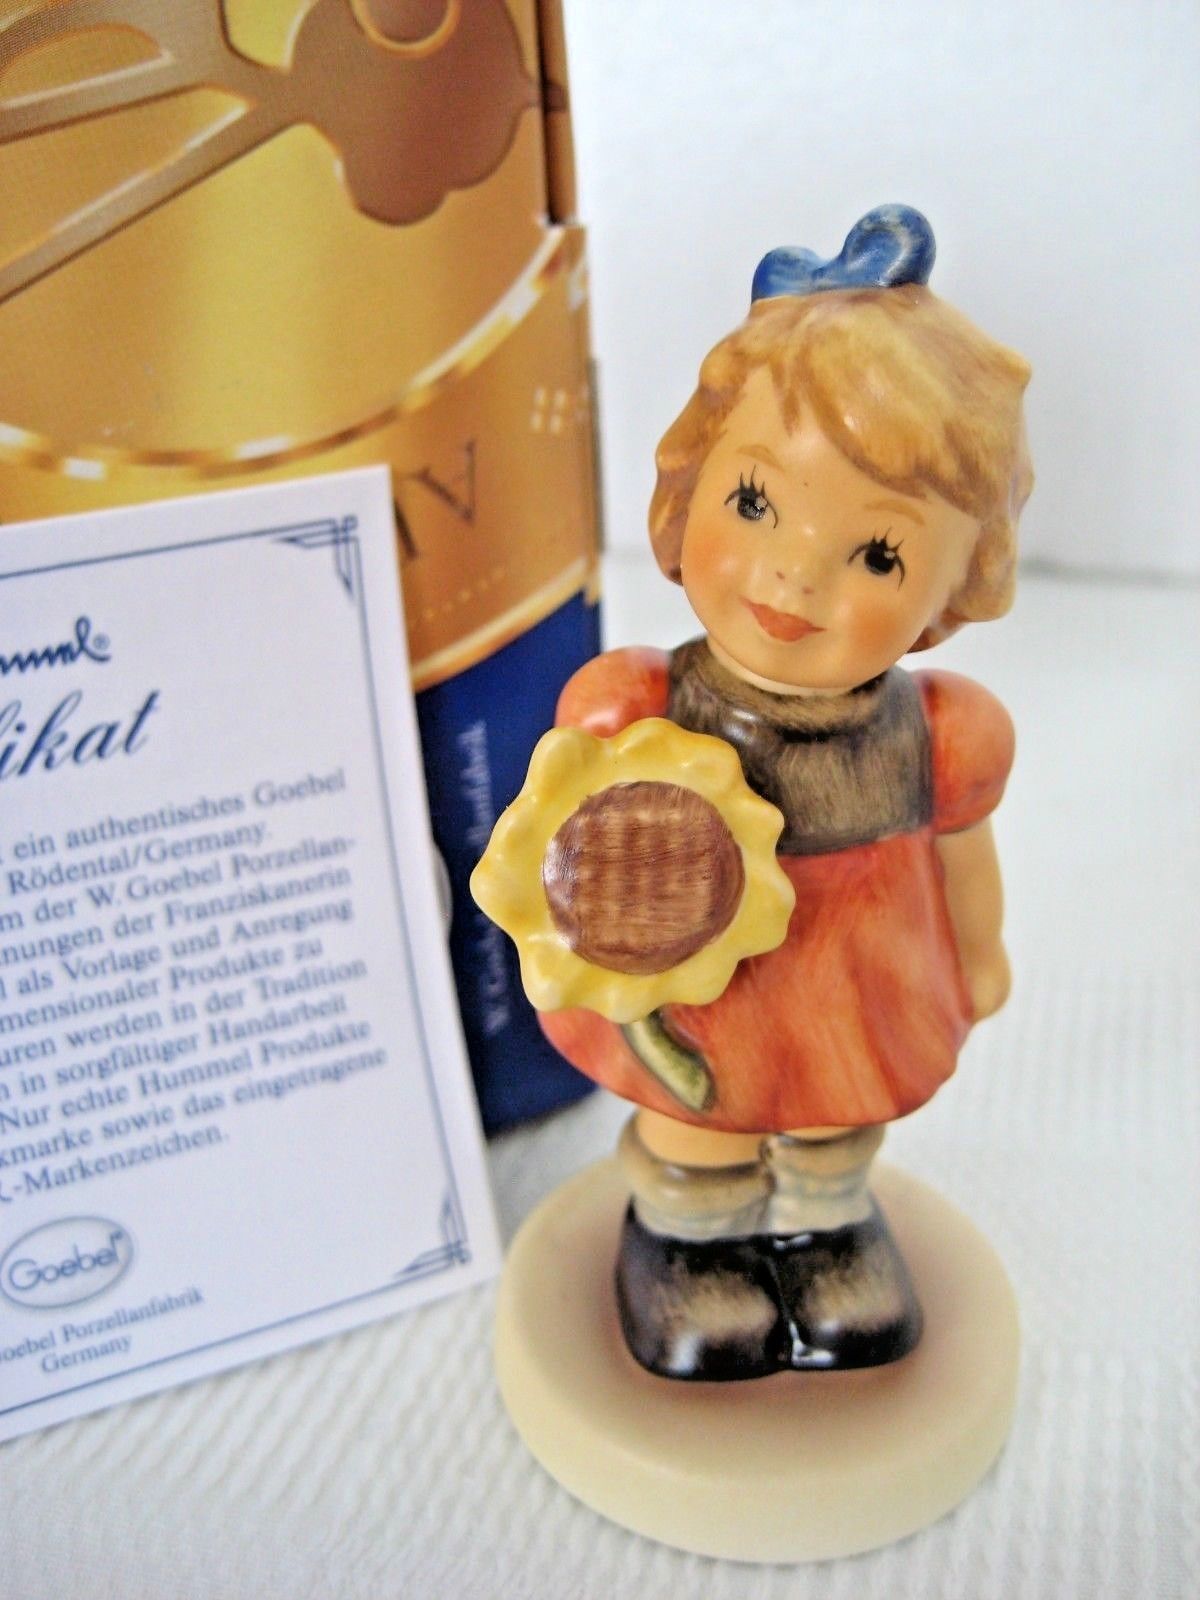 Top Condition with box! Hummel Hummel Figure 2195 4/0 Sunflower Girl 3 1/8in Rare 